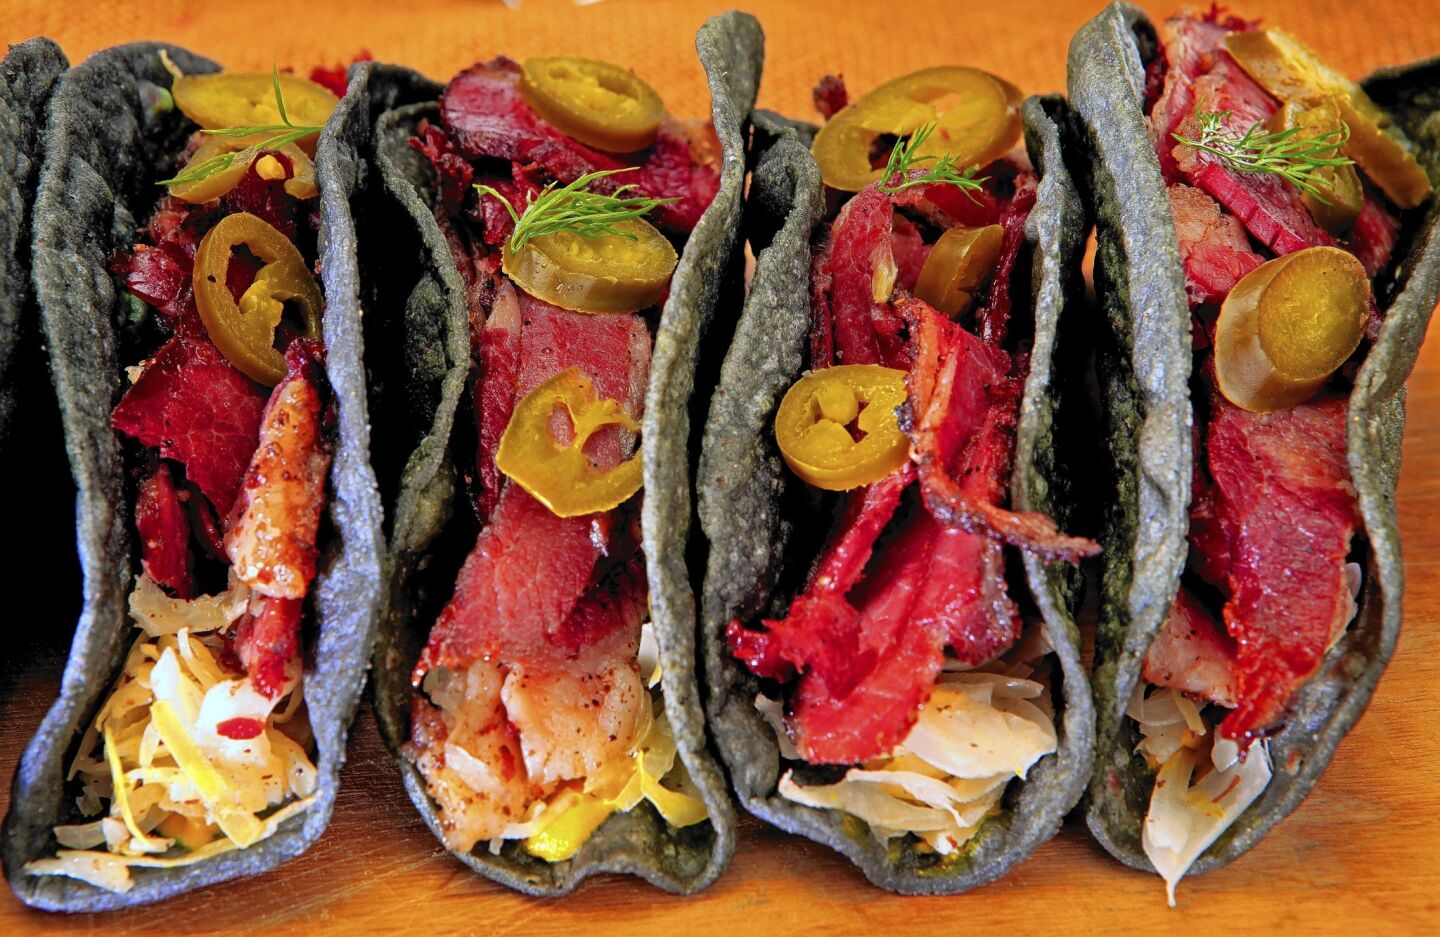 Pastrami tacos made with blue-corn tortillas.